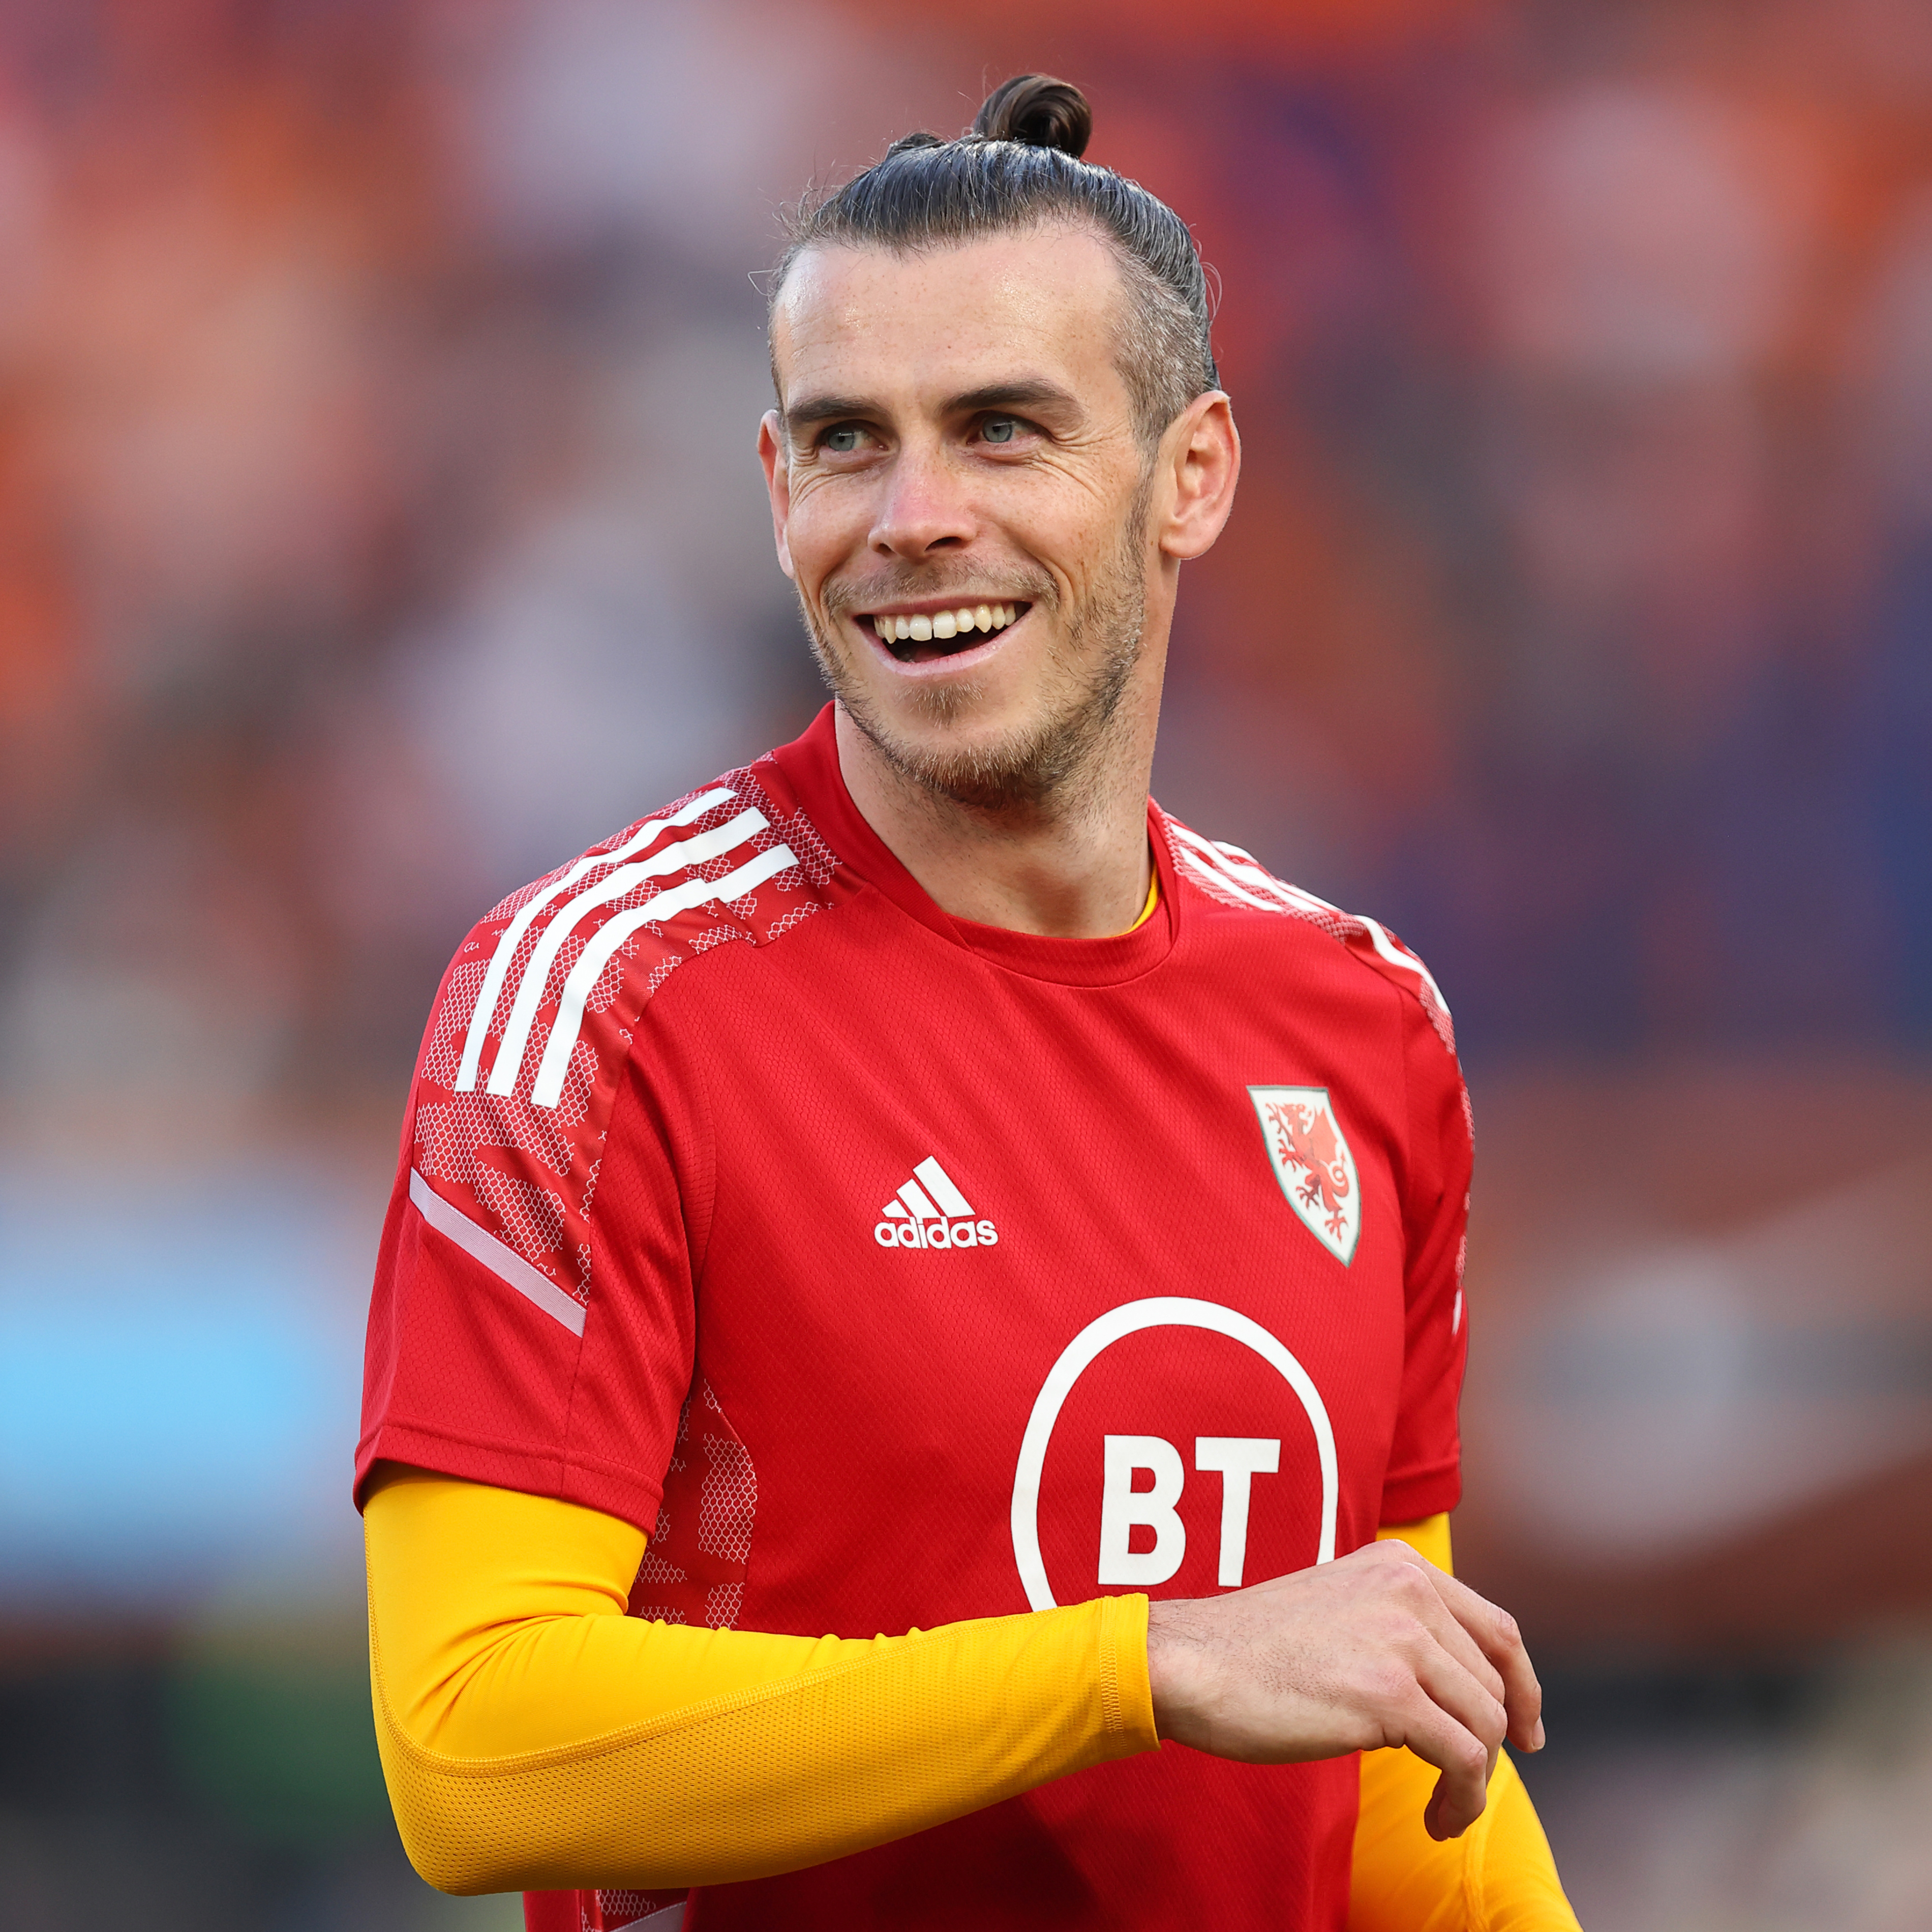 Report: Former Real Madrid Star Gareth Bale Finalizing Contract with MLS' LAFC